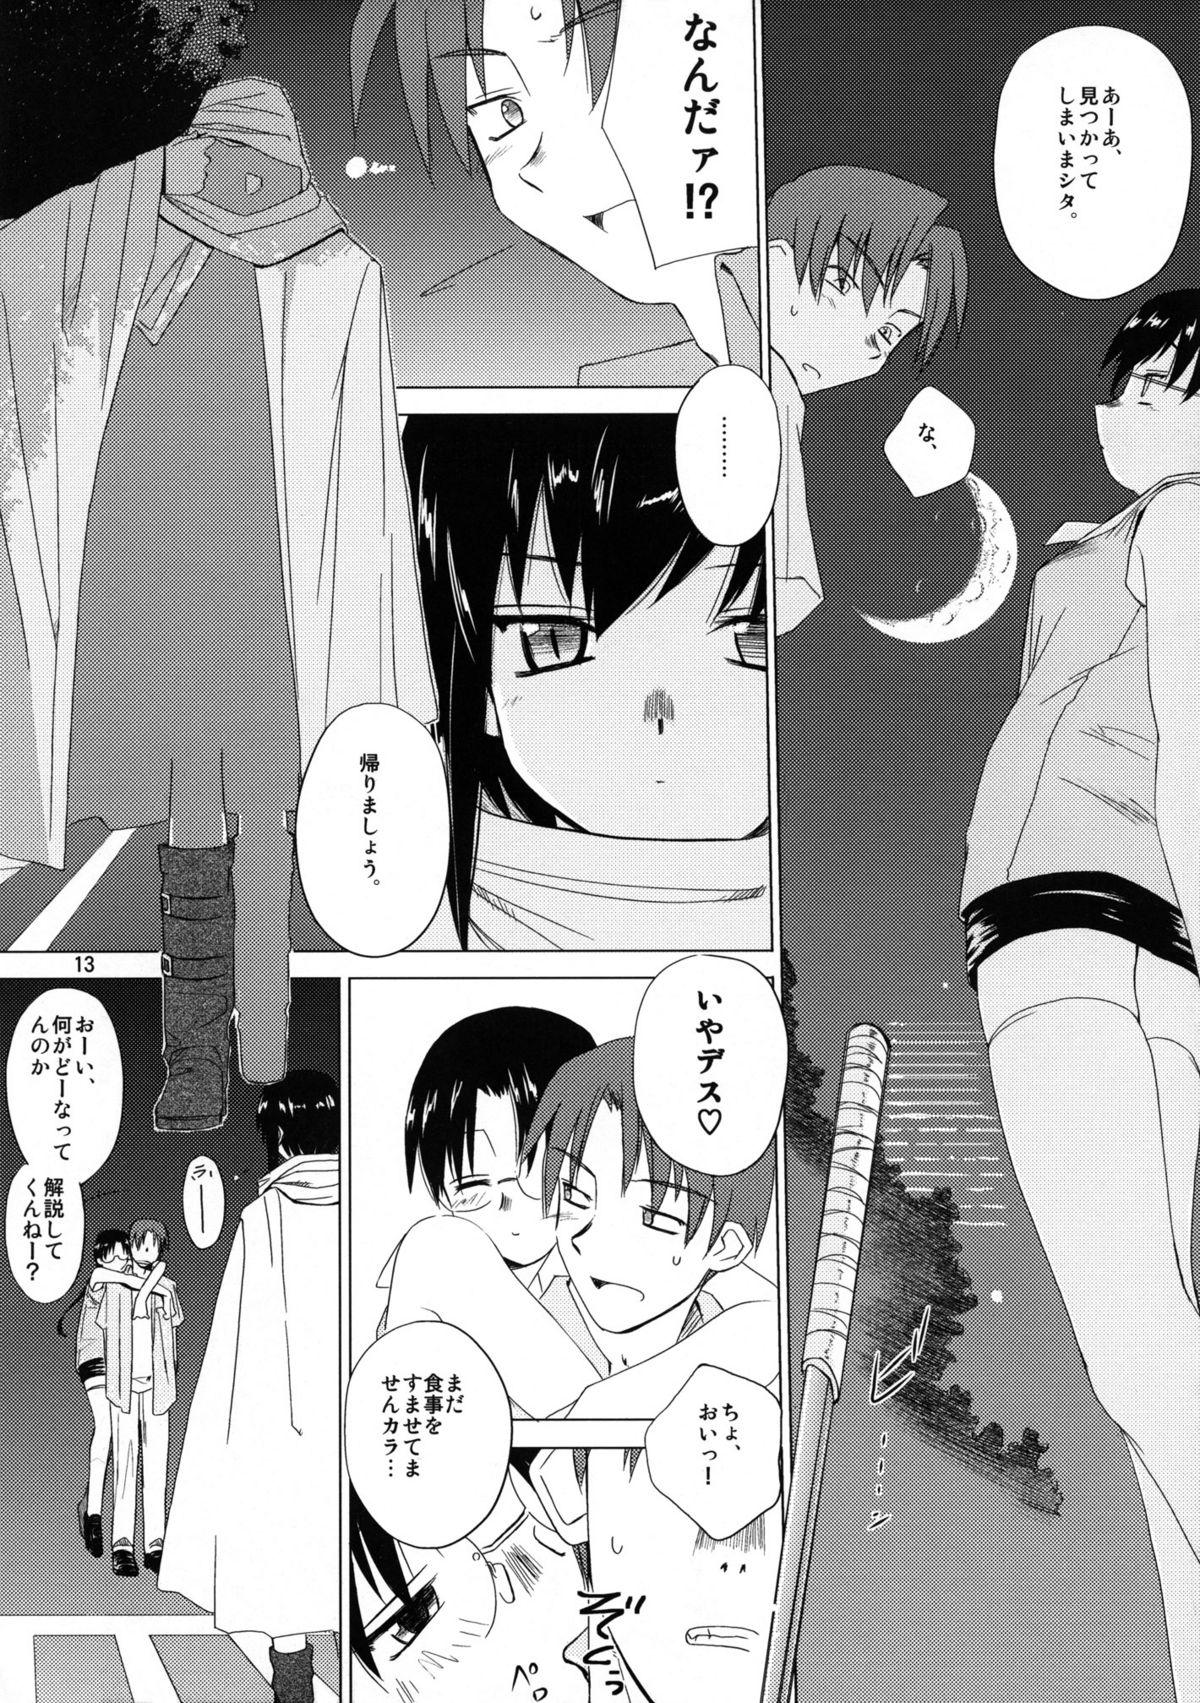 Big breasts (C68) [Tear Drop (tsuina)] [C2] (To Heart) - To heart Grande - Page 14